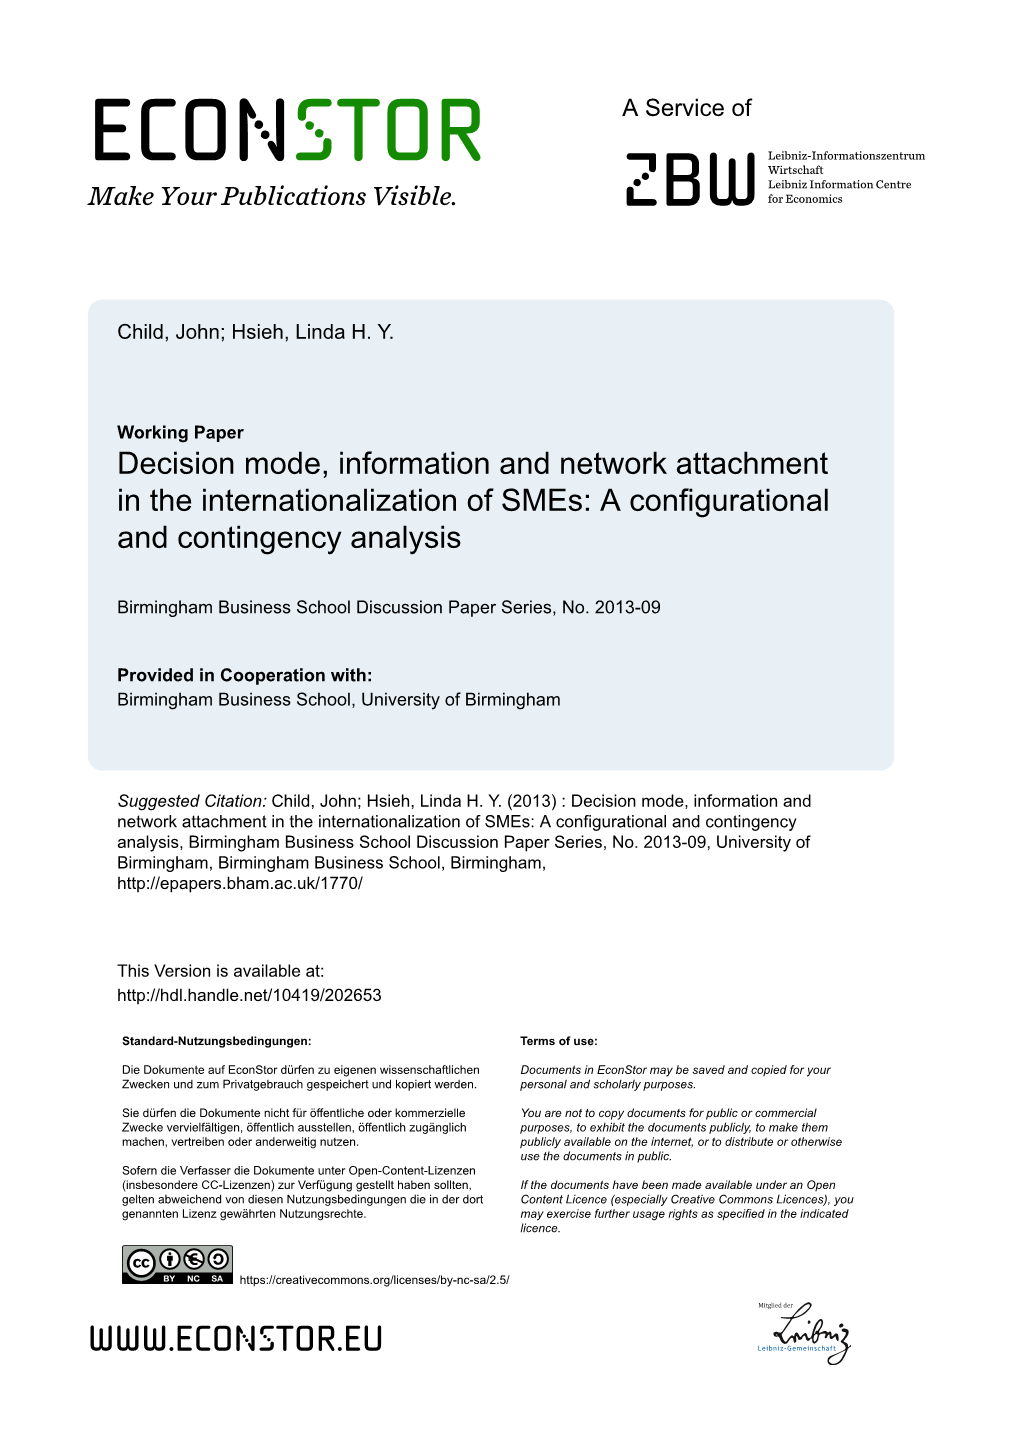 Decision Mode, Information and Network Attachment in the Internationalization of Smes: a Configurational and Contingency Analysis